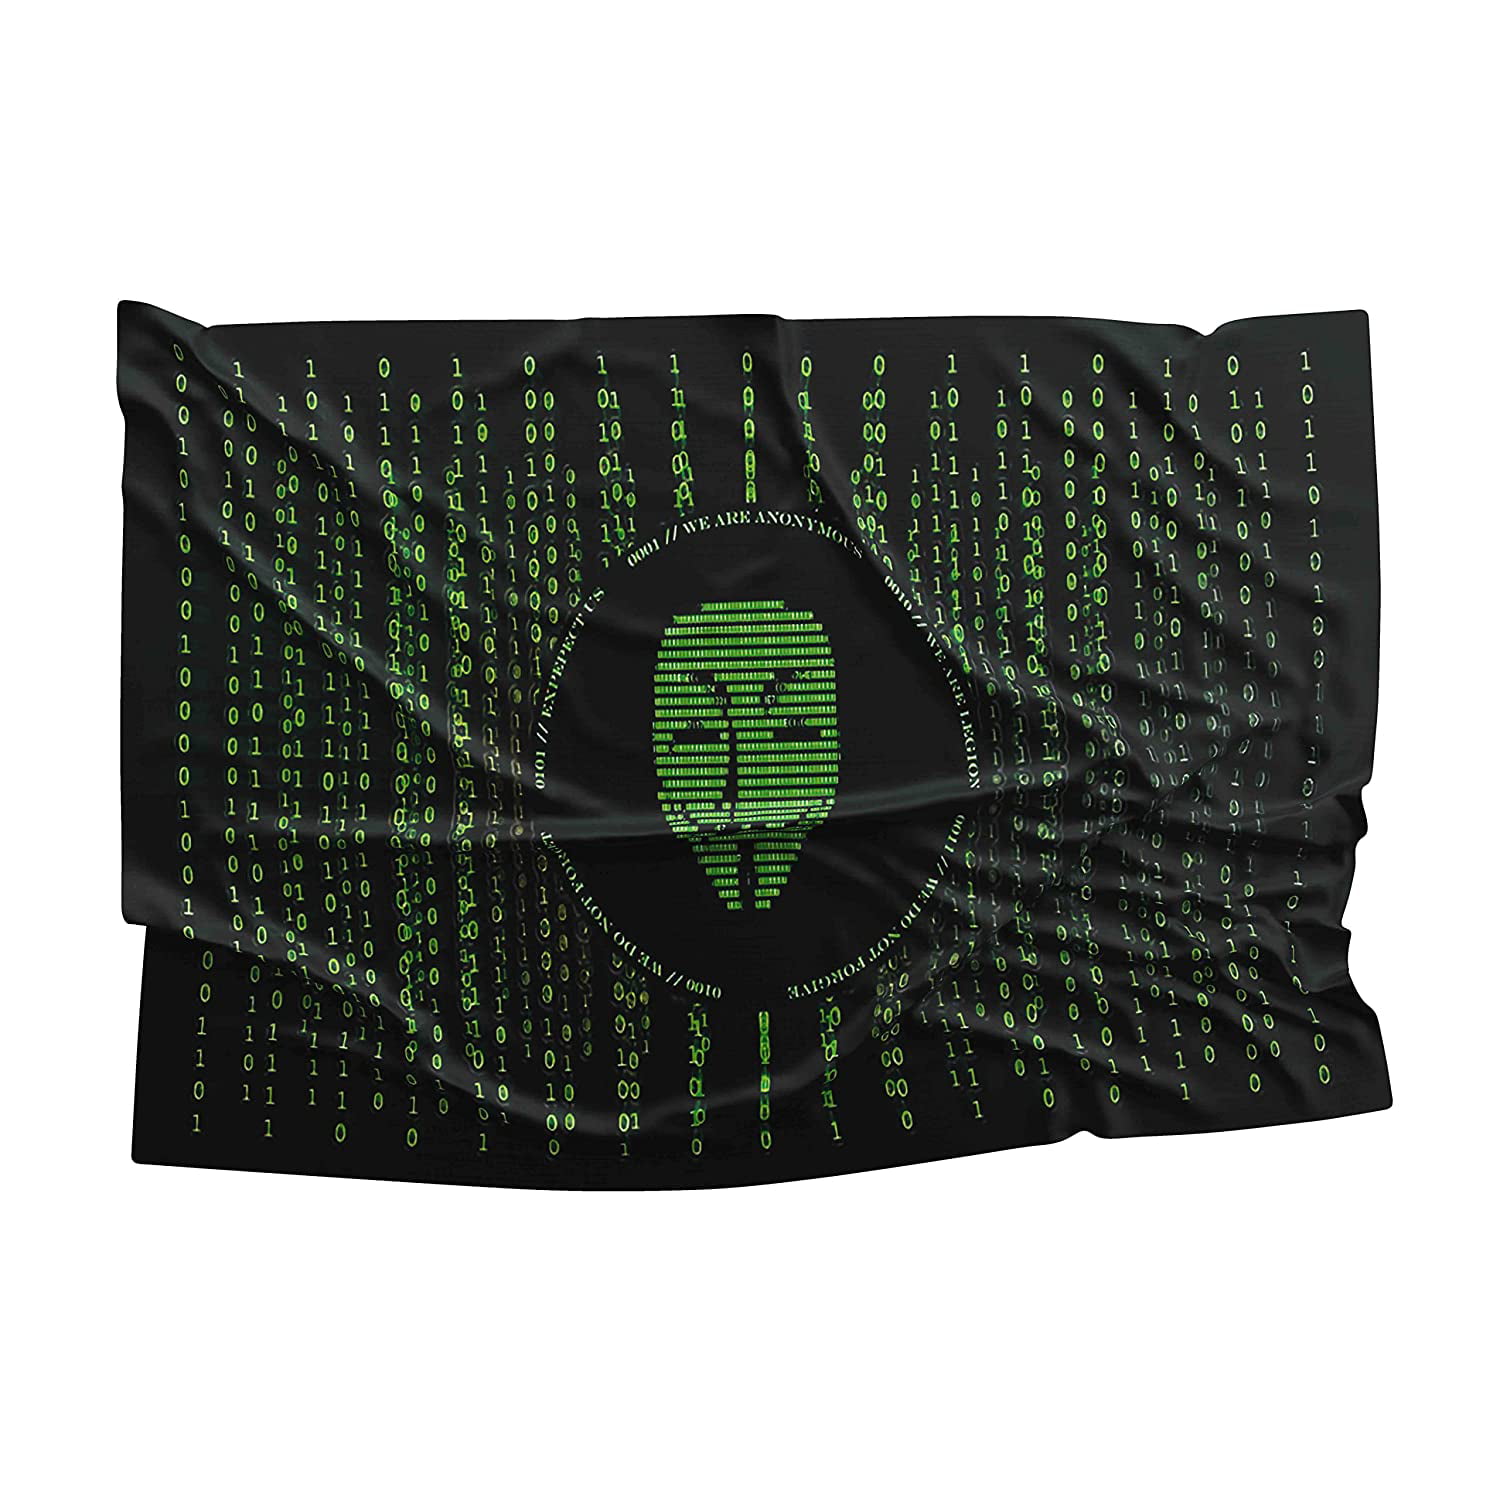 I WANT YOU ANONYMOUS TO RISE FLAG 3X5FT BANNER US SELLER 